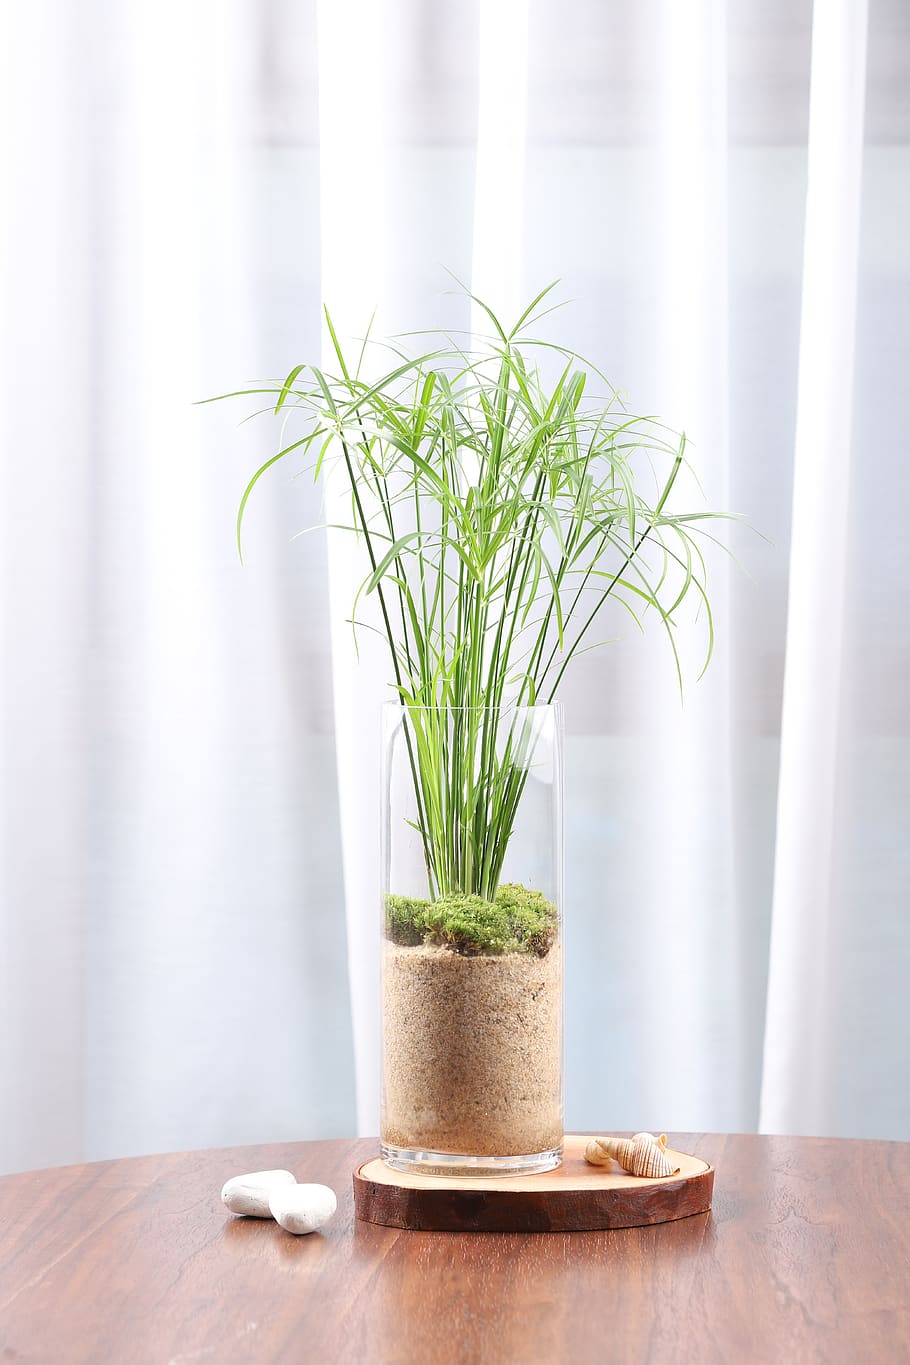 papyrus, hydroponic plants, terrarium, plant, growth, indoors, potted plant, nature, table, freshness